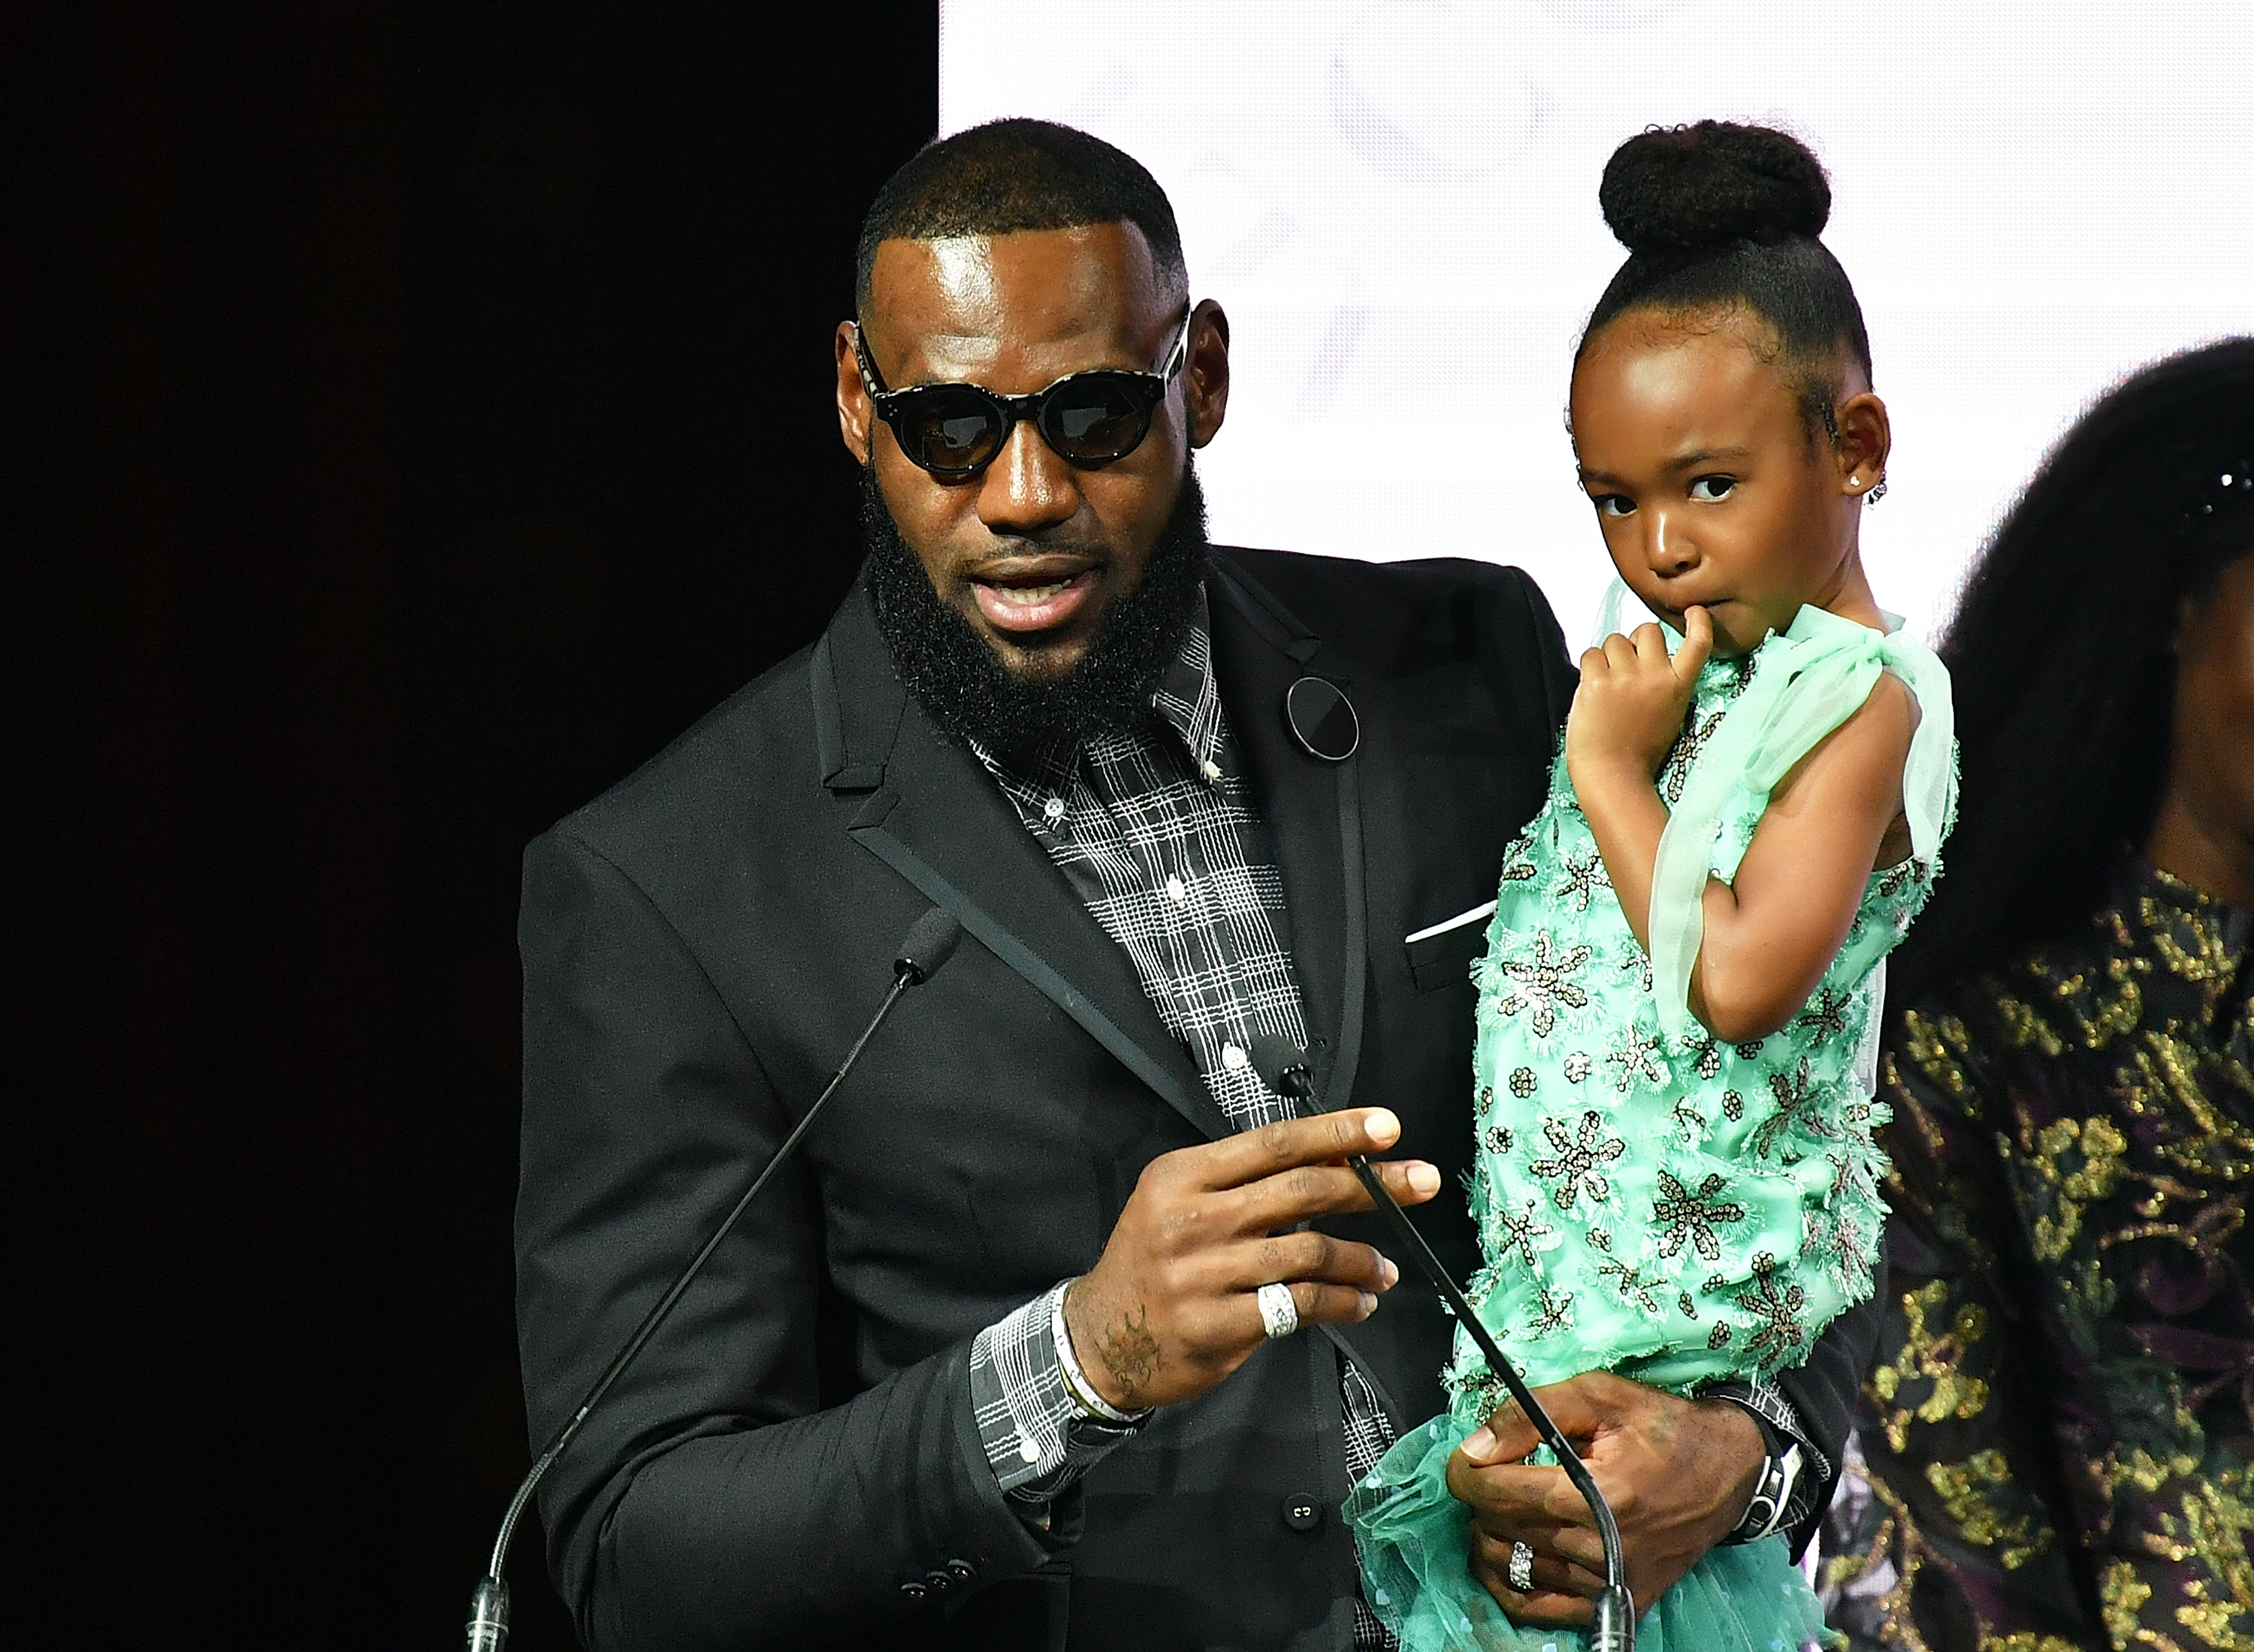 LeBron James, recepient of Icon 360 Award and daughter Zhuri James attend Harlem's Fashion Row during New York Fahion Week at Capitale on September 4, 2018, in New York City | Source : Getty Images